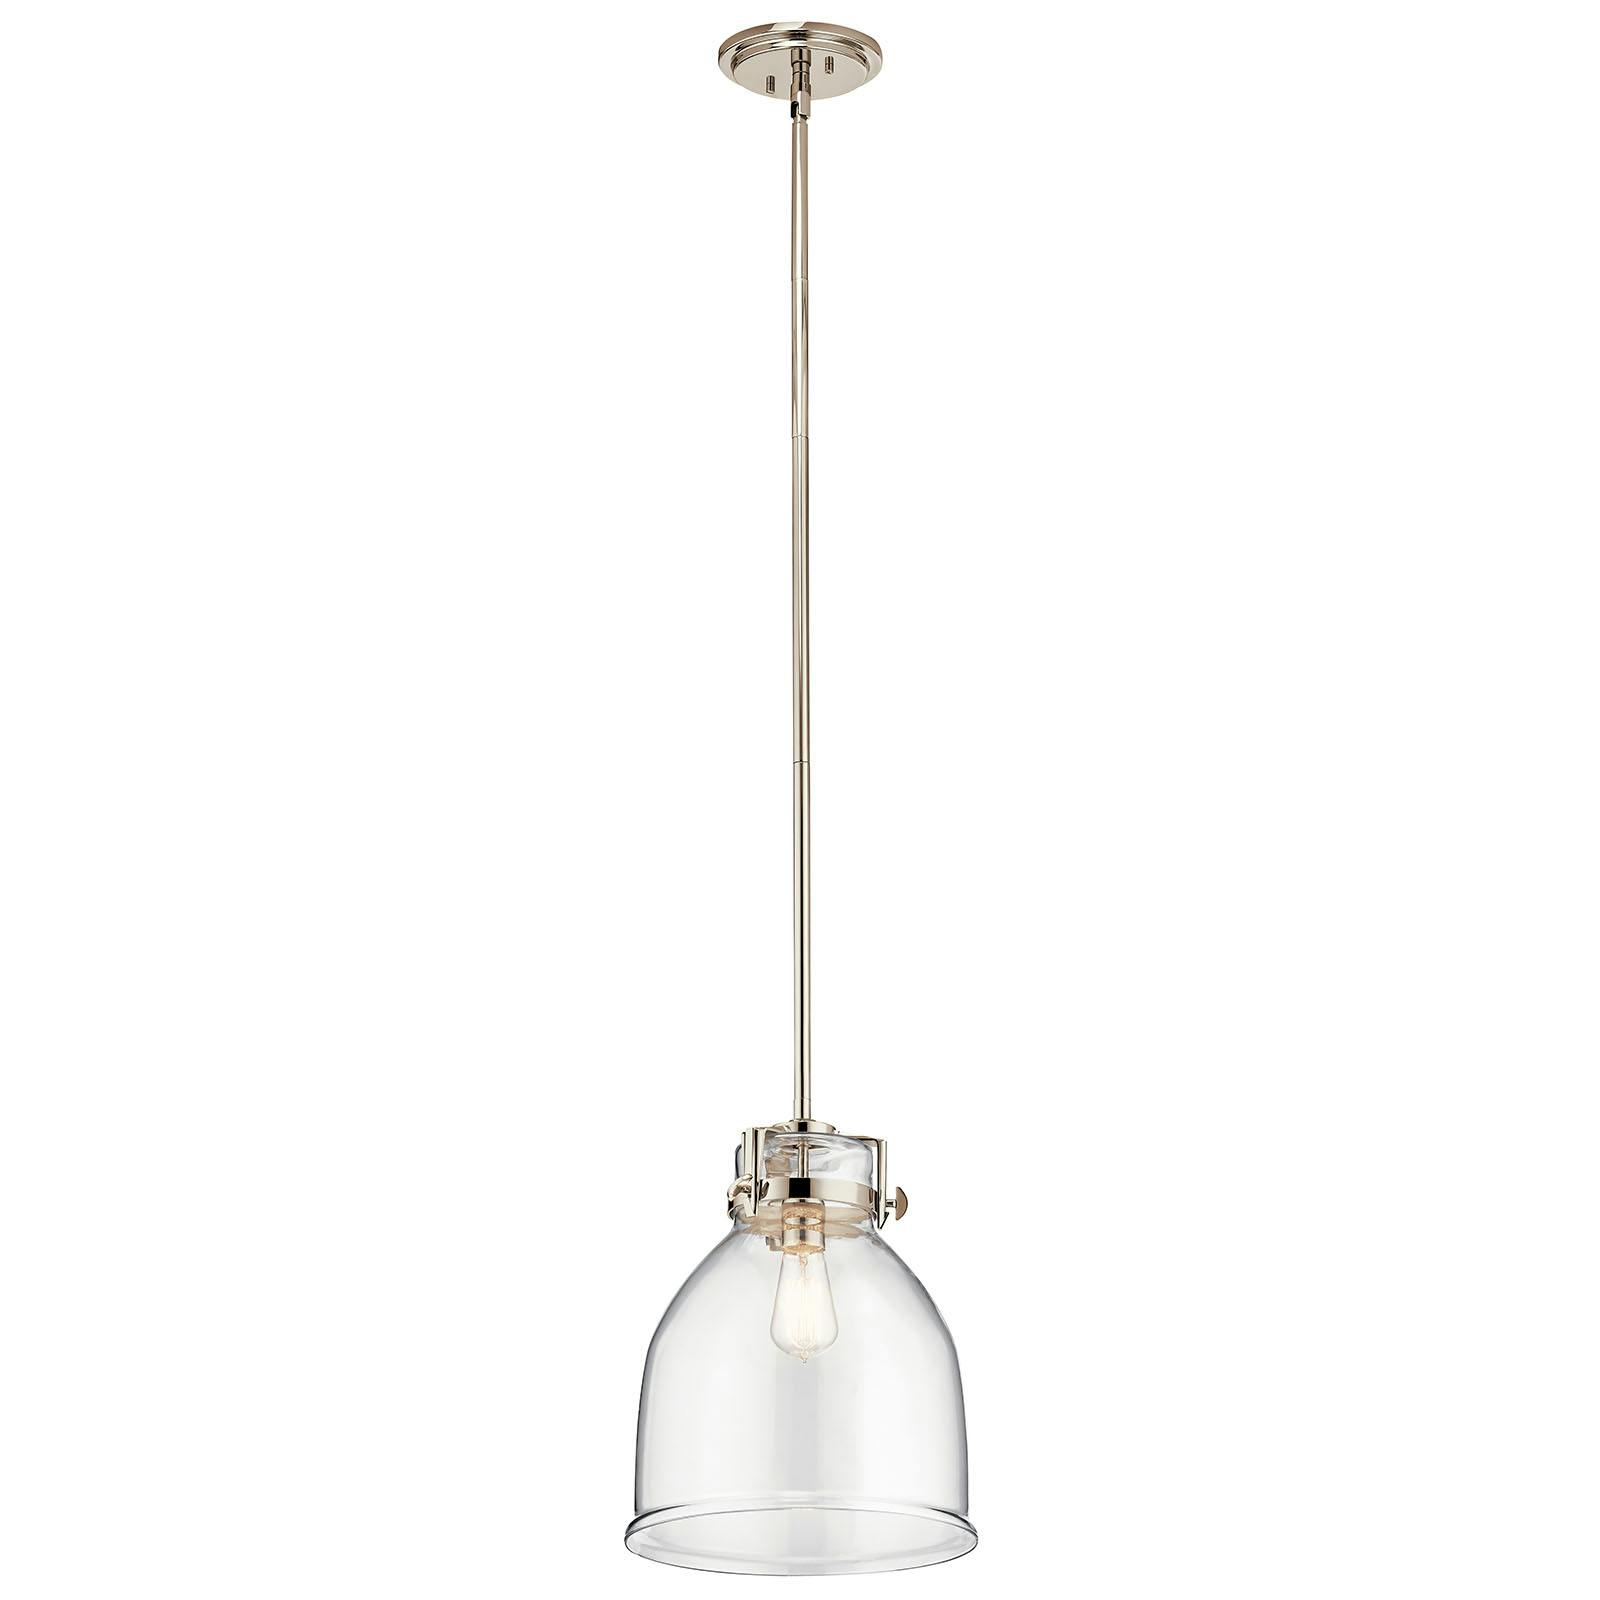 Briar 1 Light Pendant Polished Nickel on a white background